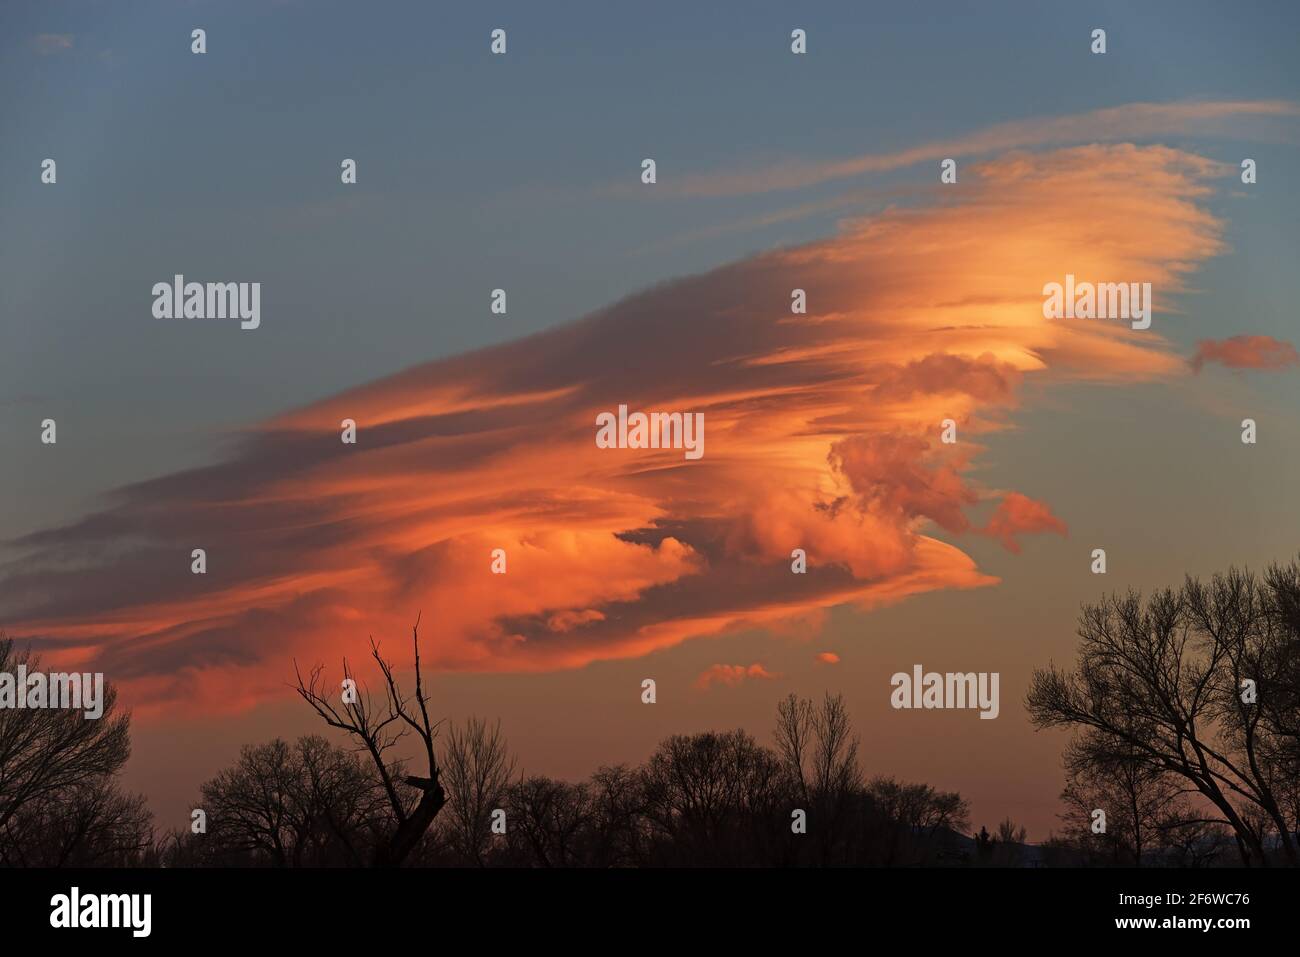 lenticular cloud over the Owens Valley at sunset with silhouette trees at the bottom Stock Photo